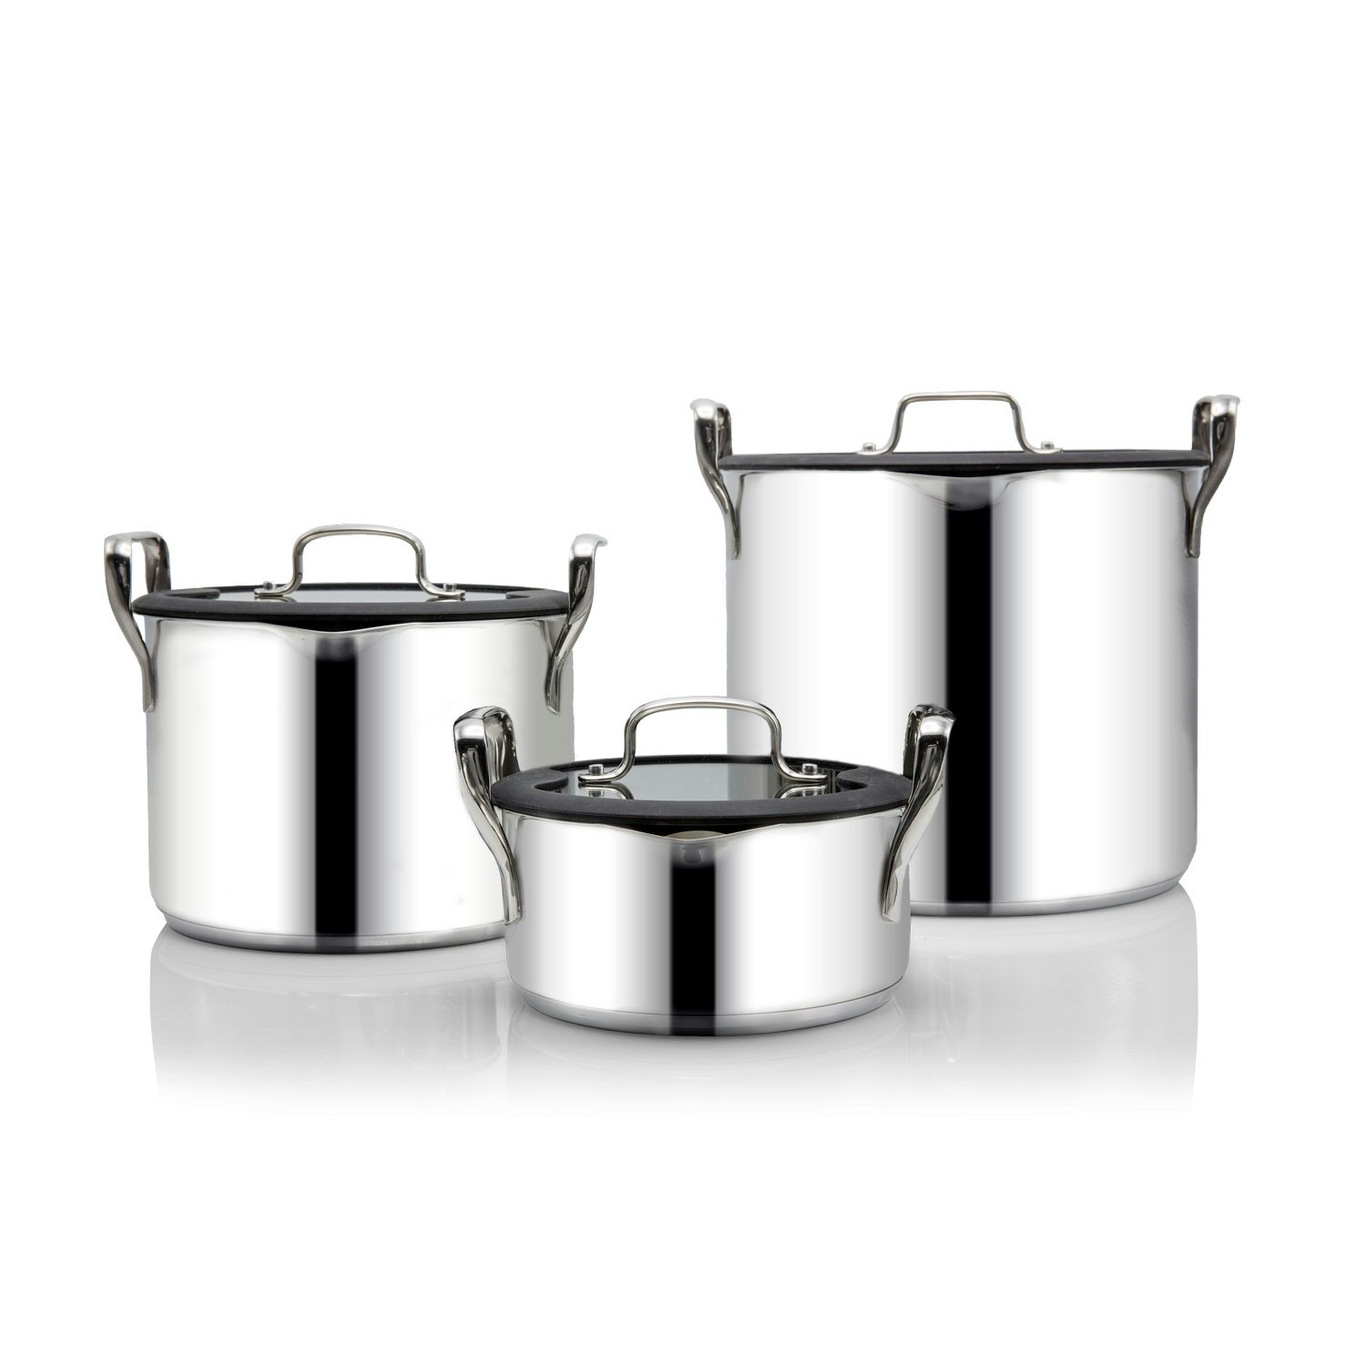 Denmark Cookware Stainless Steel Round & Reviews